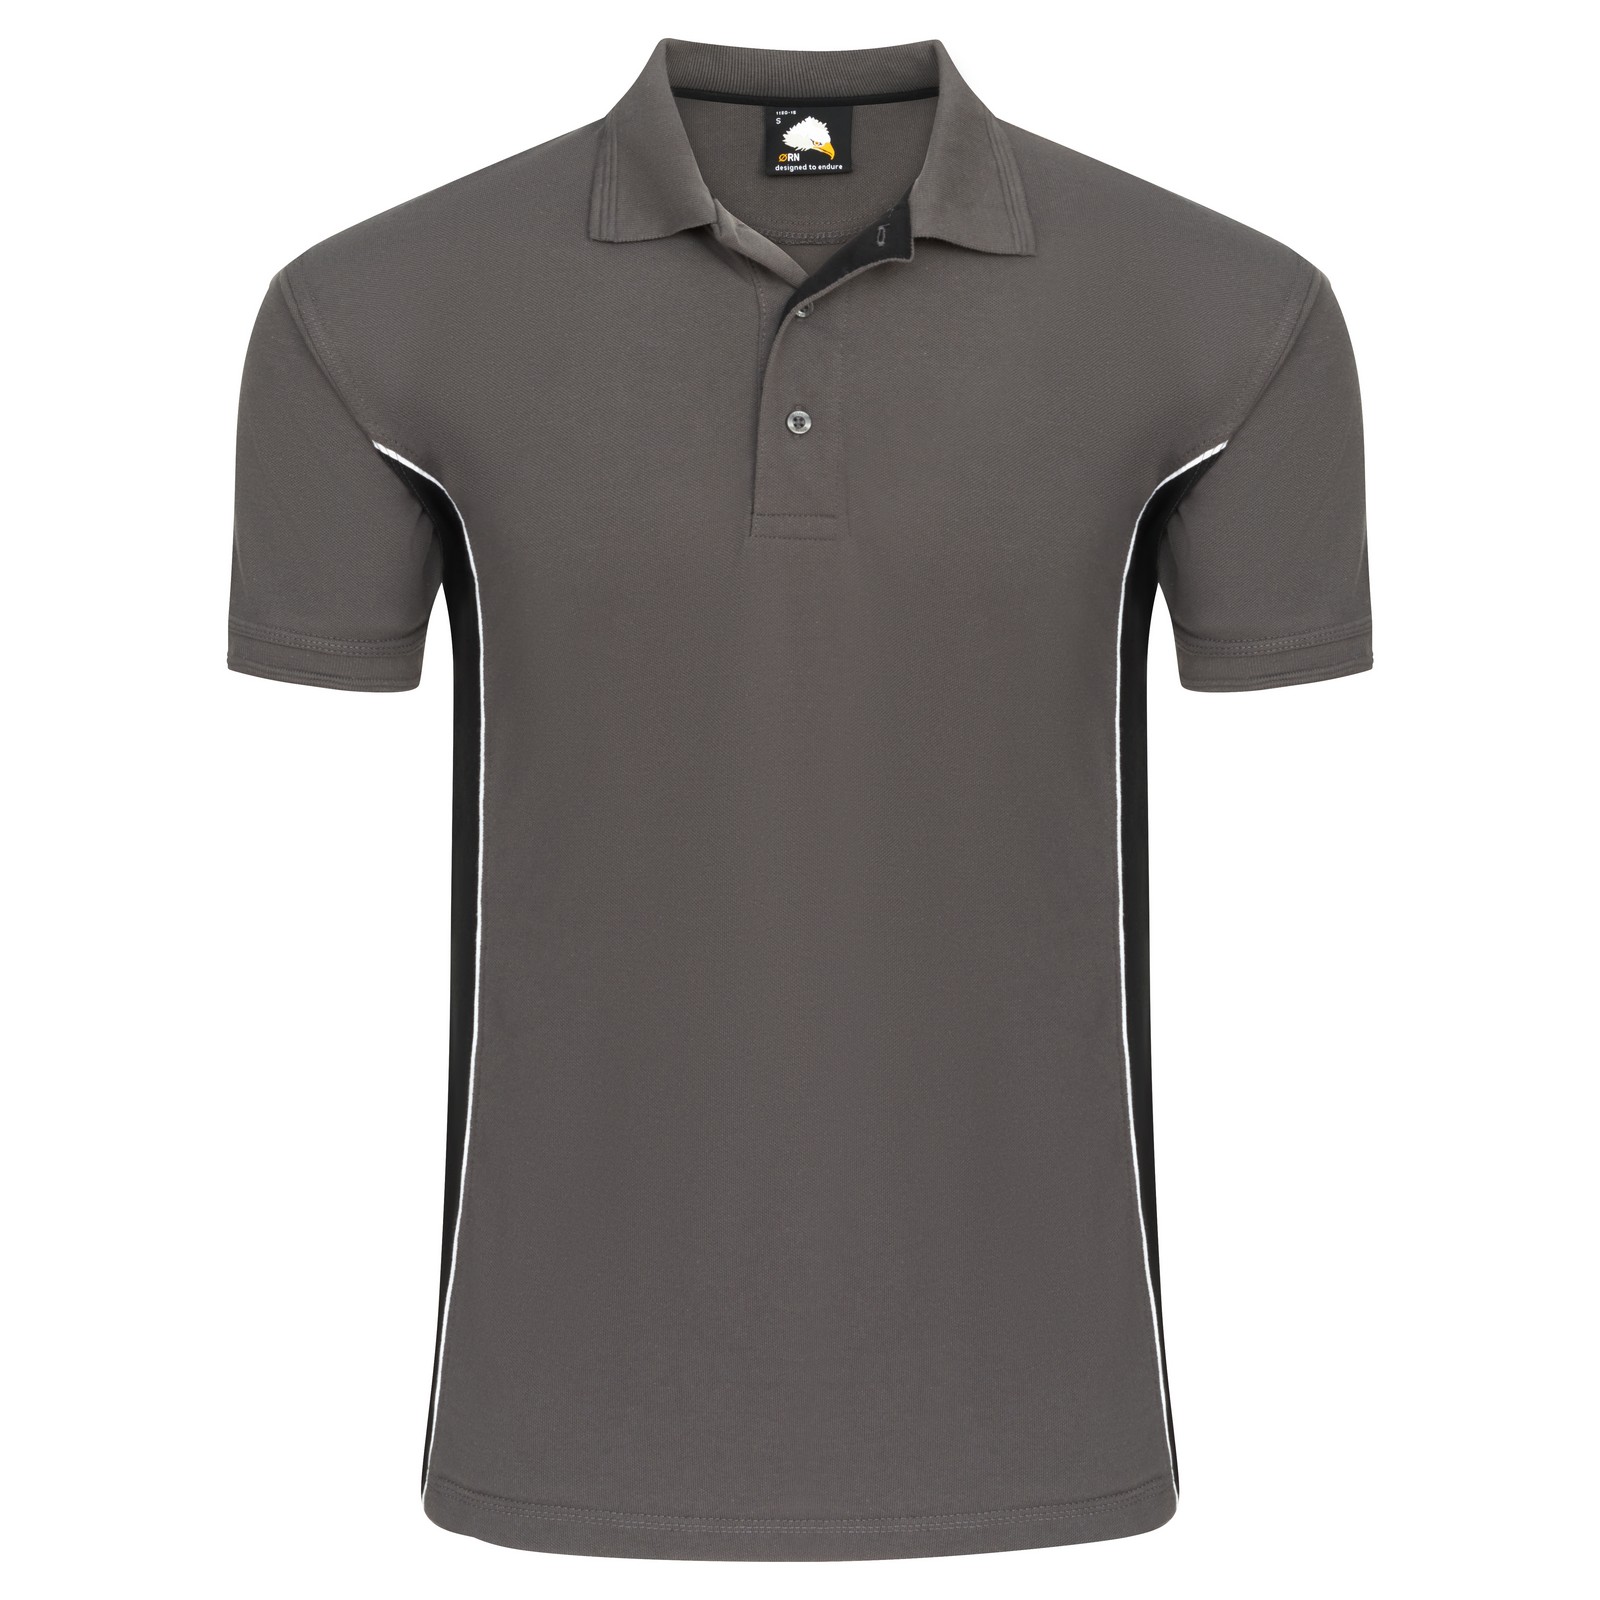 Silverswift premium two-tone polo shirt | WISE Worksafe